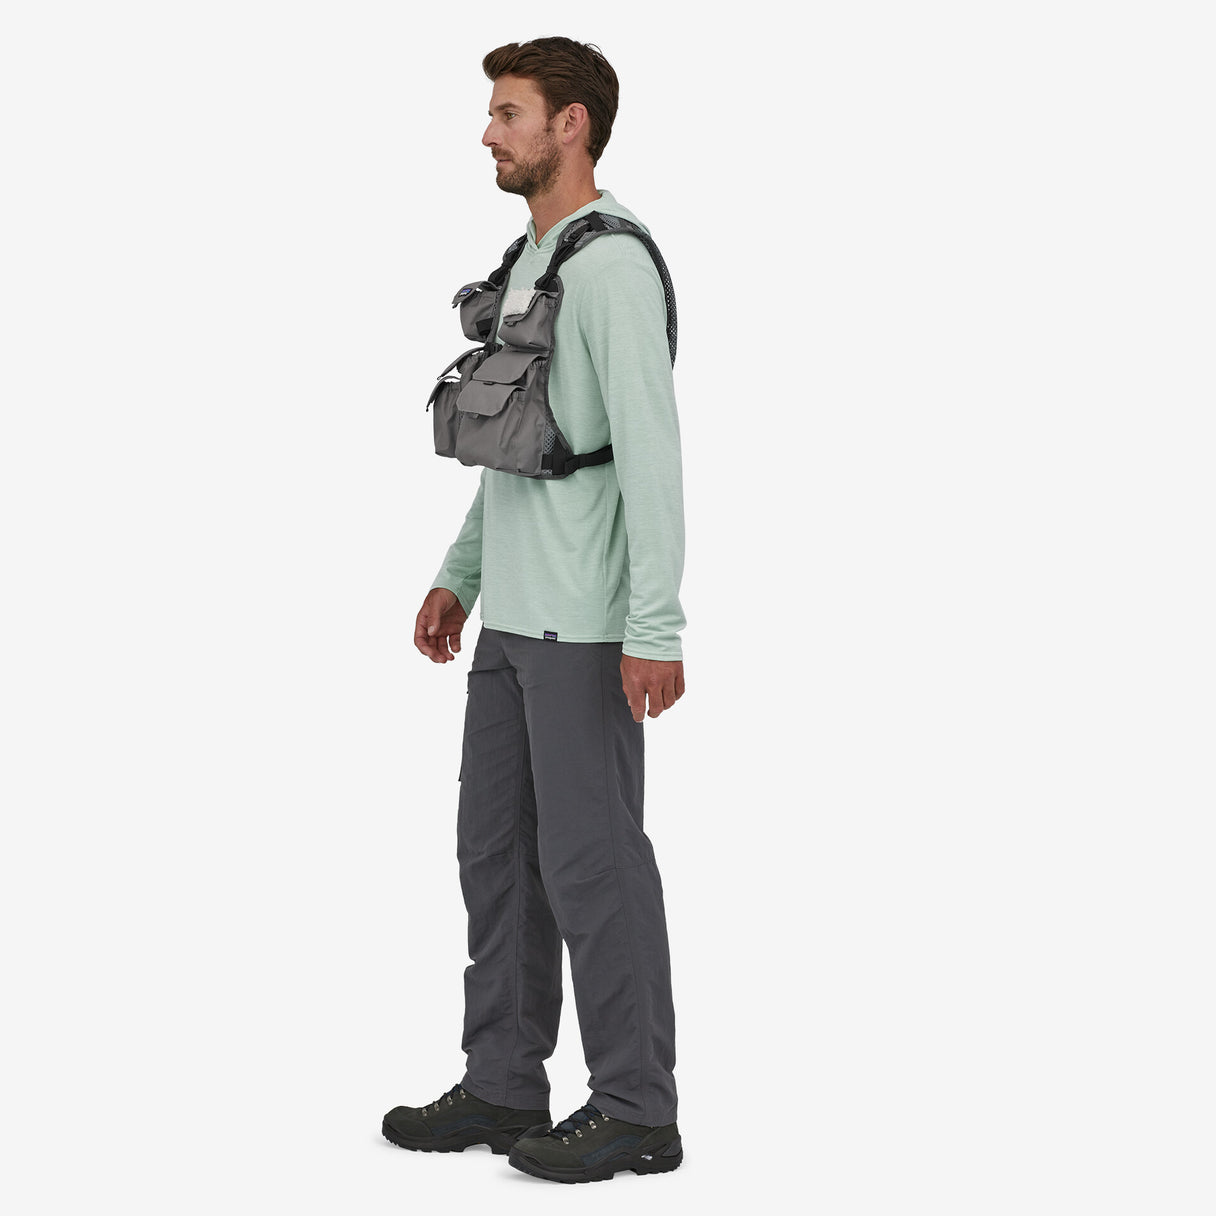 Patagonia Stealth Convertible Vest - Noble Grey